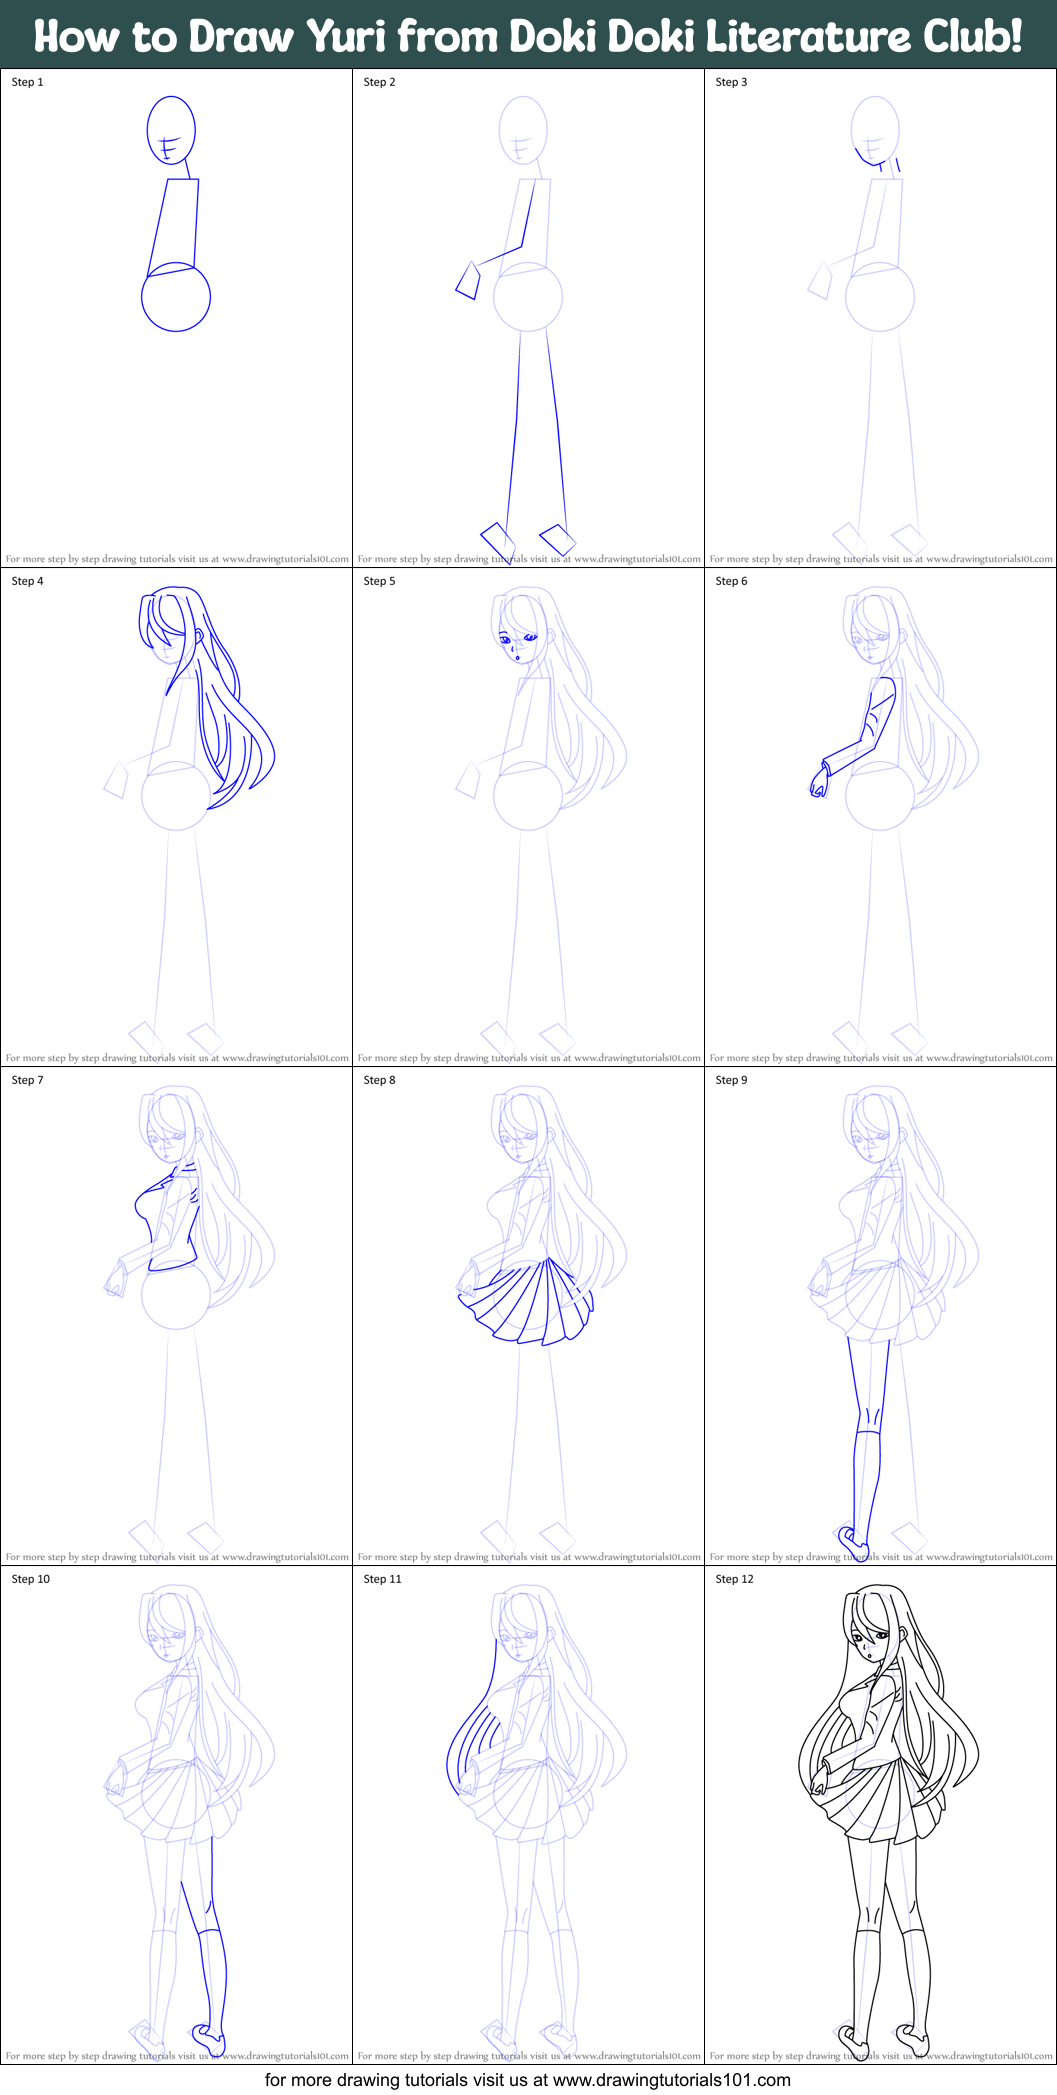 How to Draw Yuri from Doki Doki Literature Club! printable step by step drawing sheet